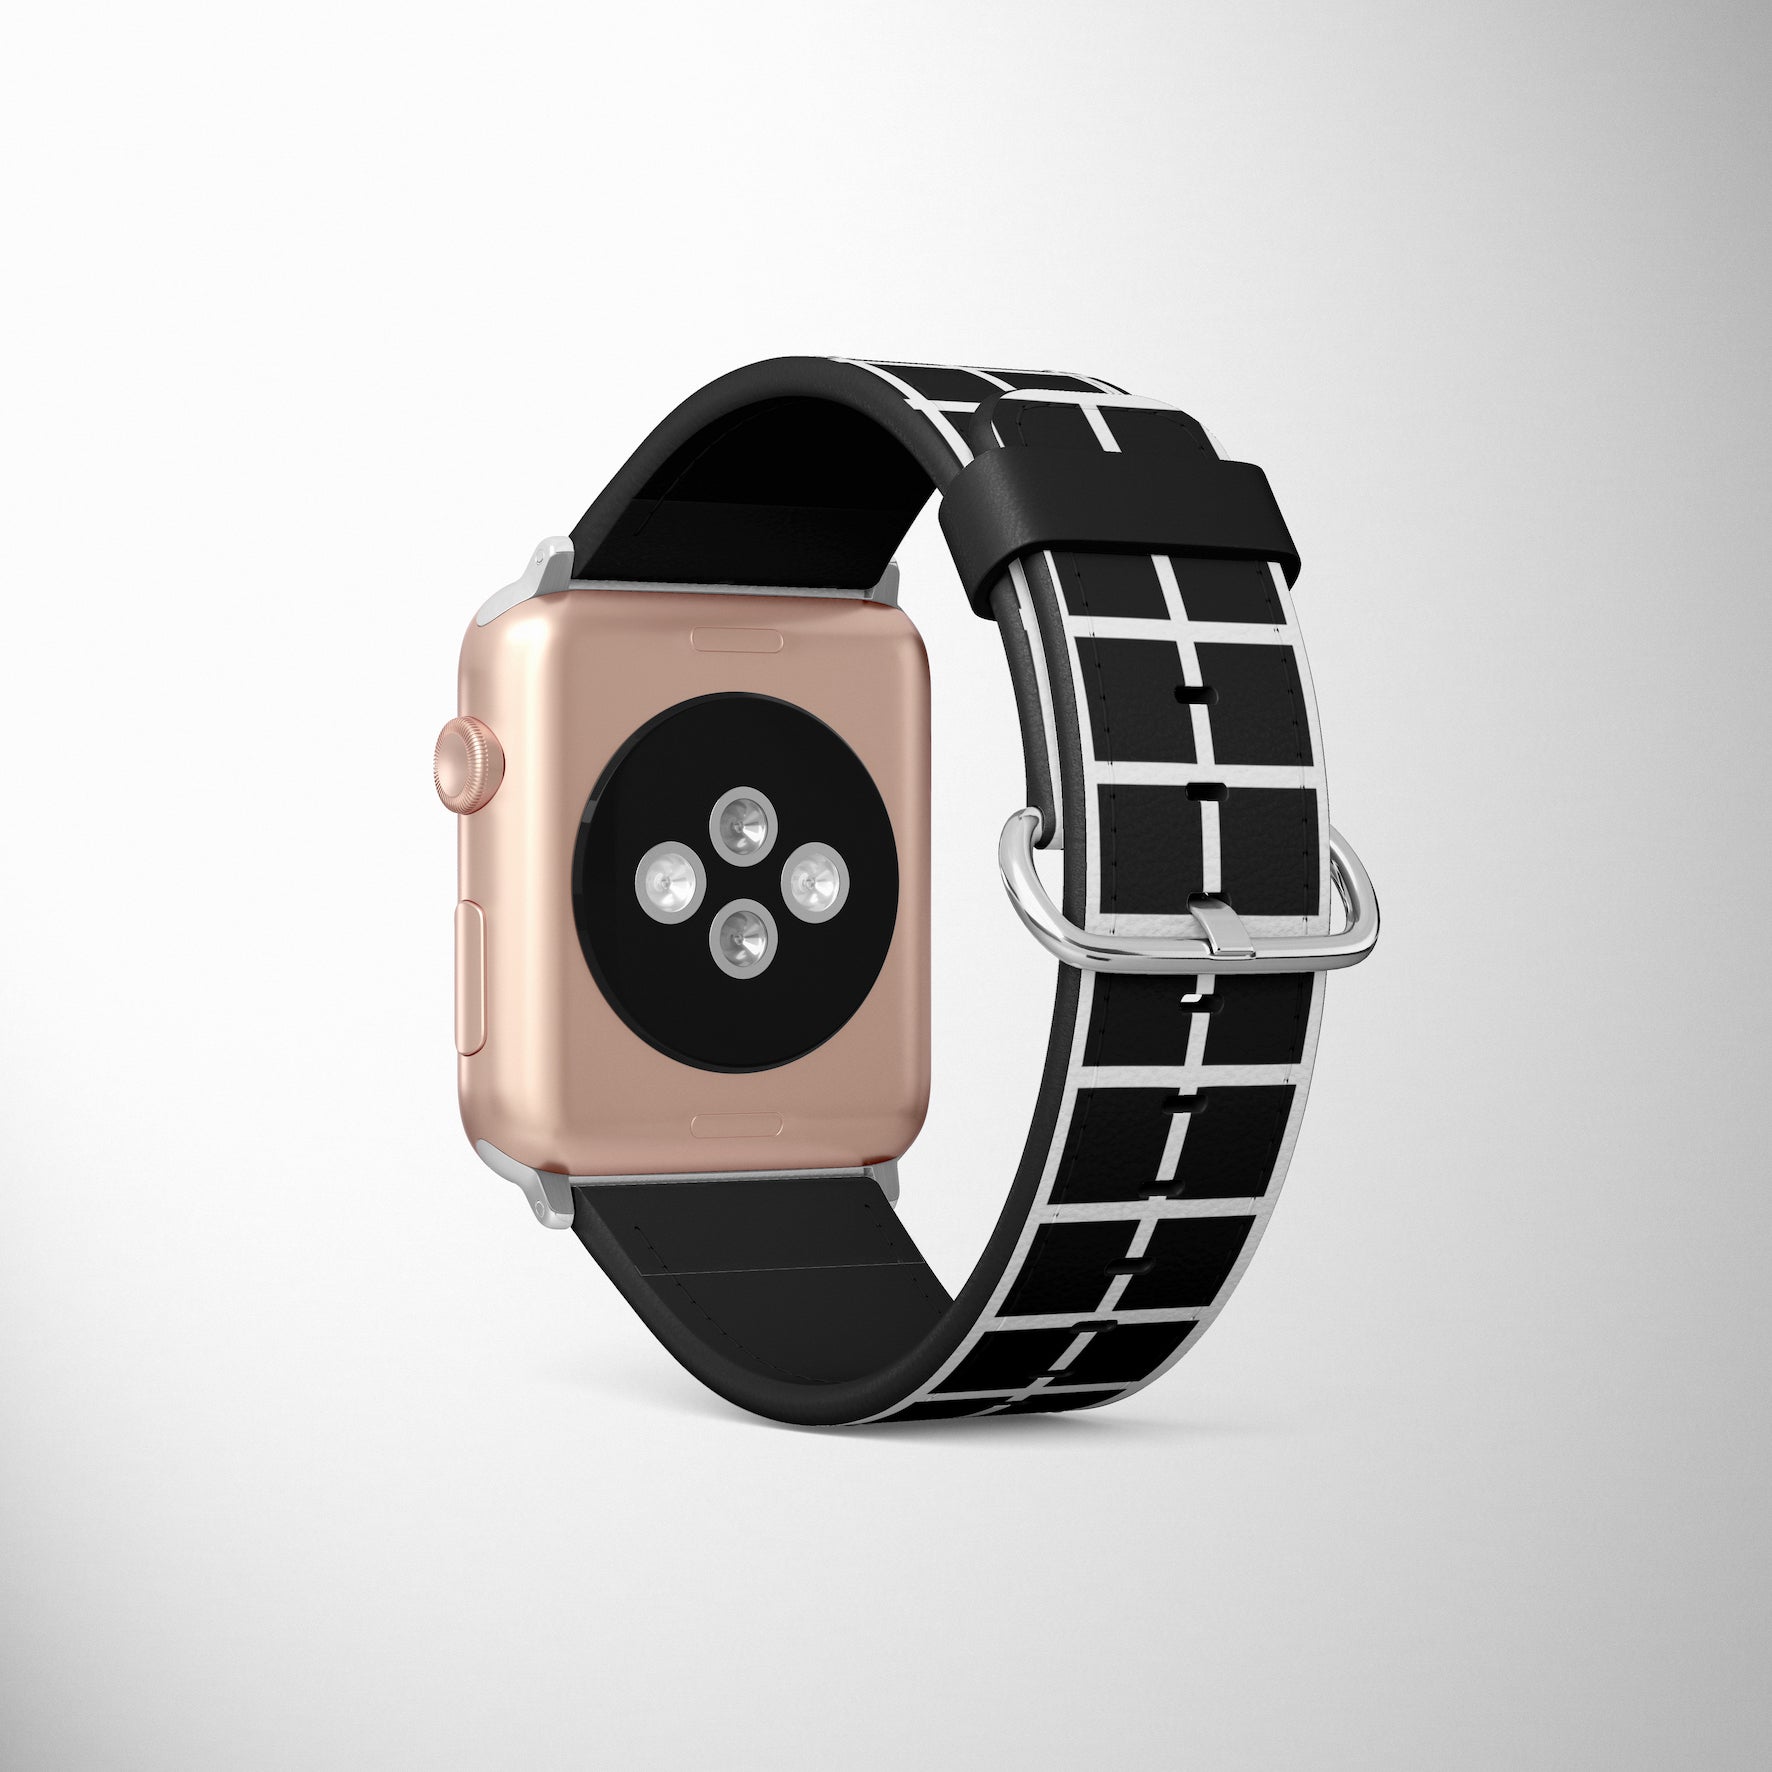 Black Square Pattern Faux Leather Apple Watch Band for Apple Watch 1,2,3,4,5,6,SE - www.scottsy.com